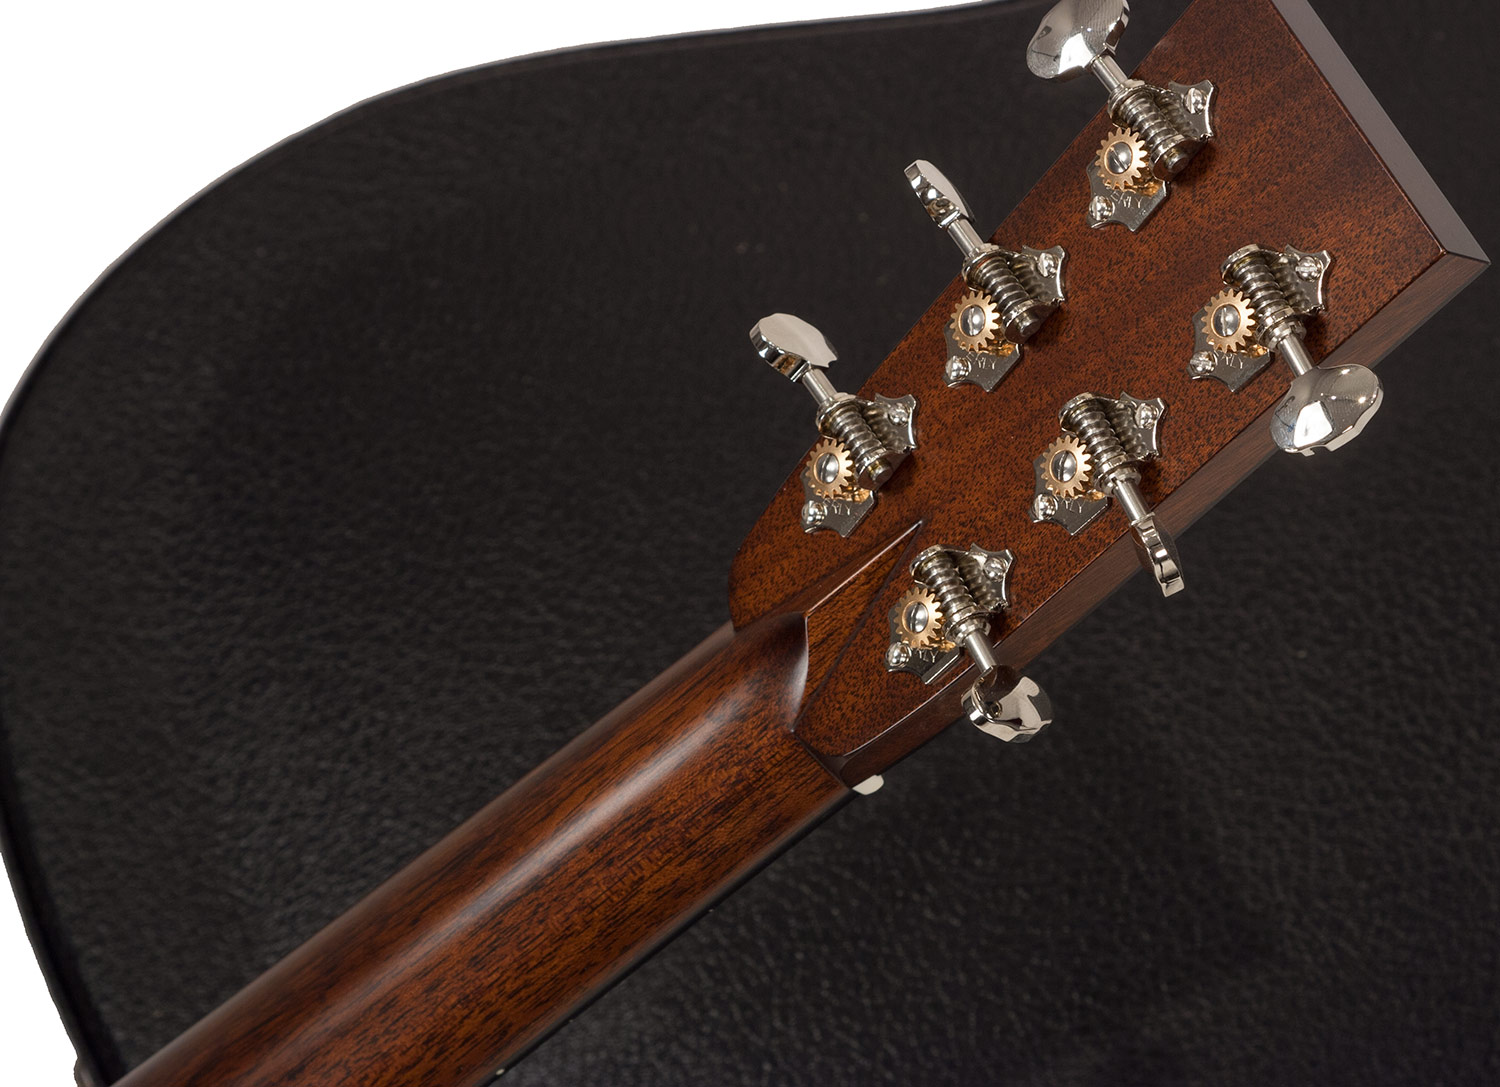 Collings D2h Custom Satin Neck, Torch Head #27113 - Natural - Acoustic guitar & electro - Variation 7